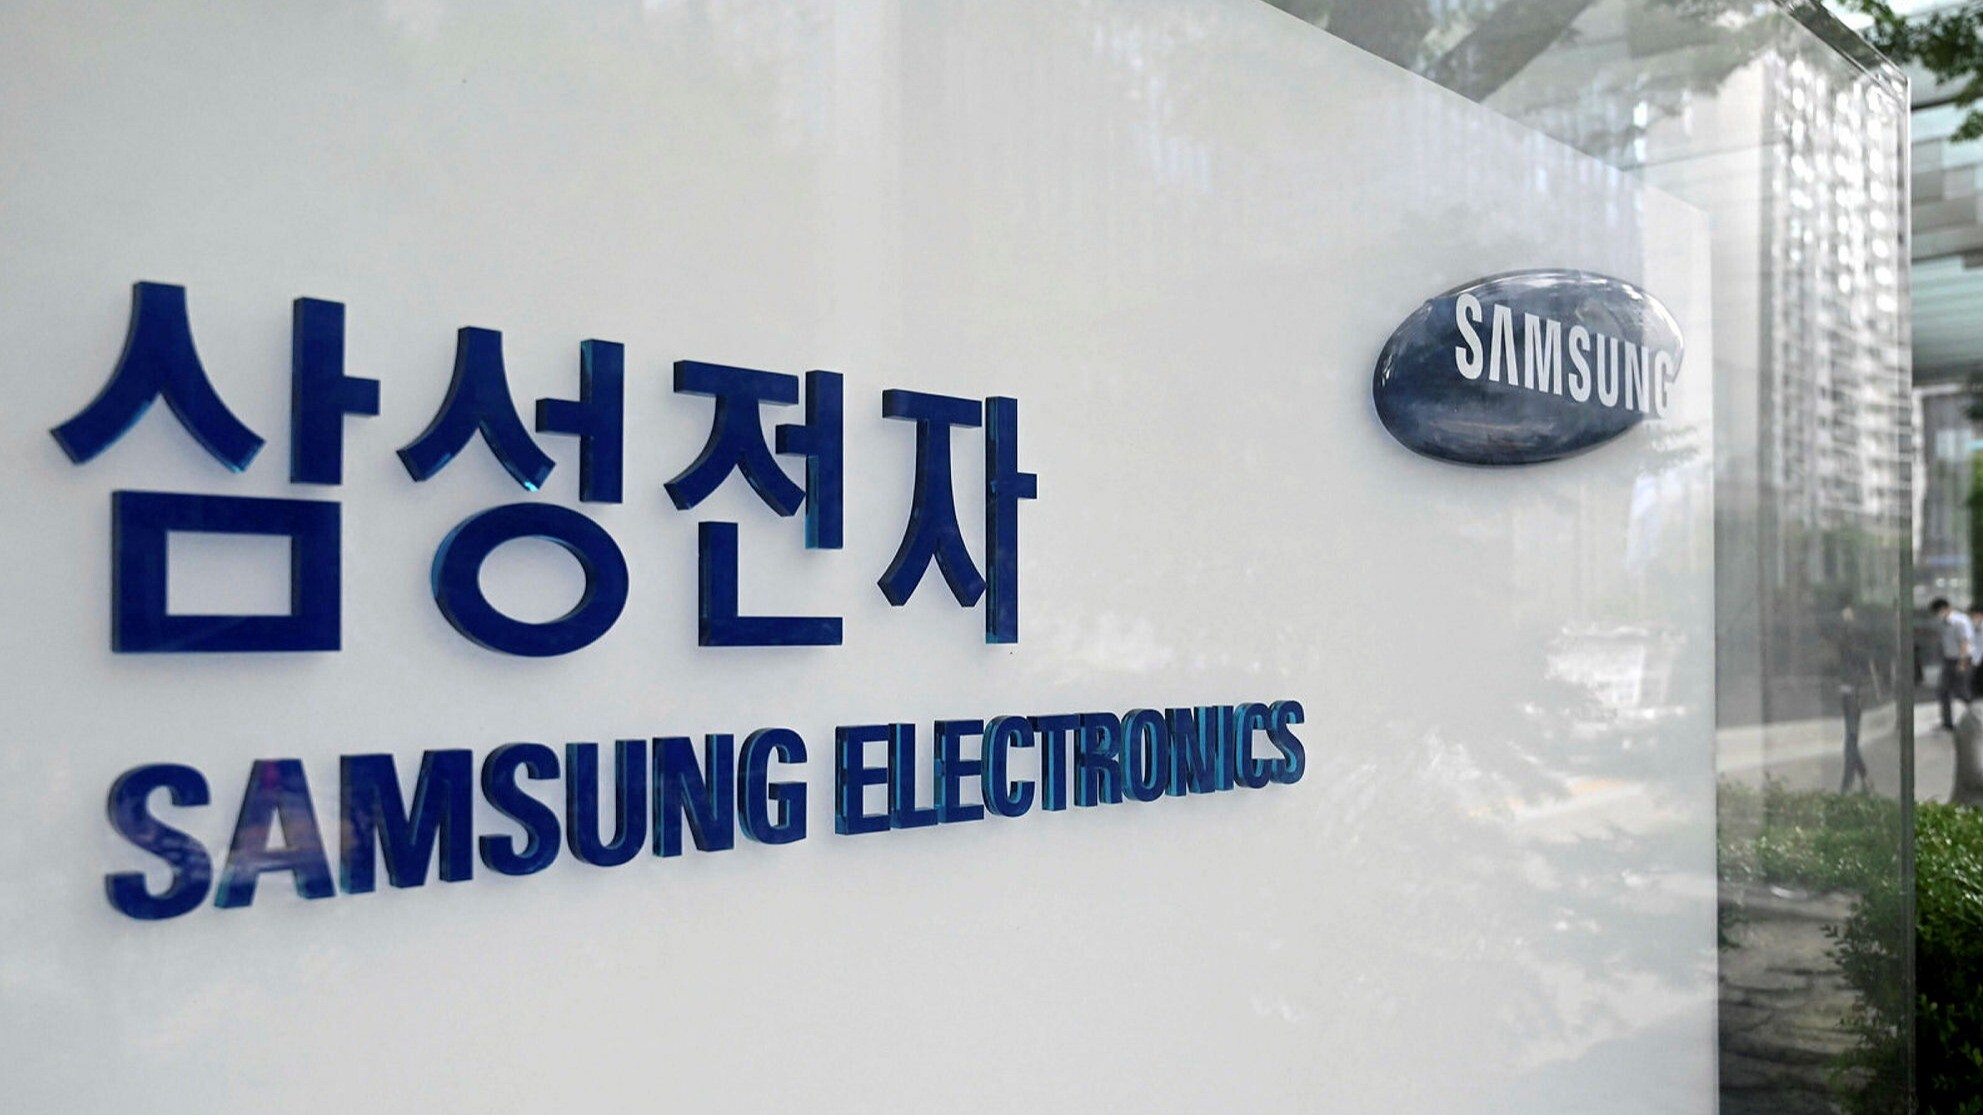 Samsung Stumps Up 0 Billion for South Korea Expansion Plans, Five New Chip Plants in the Pipeline